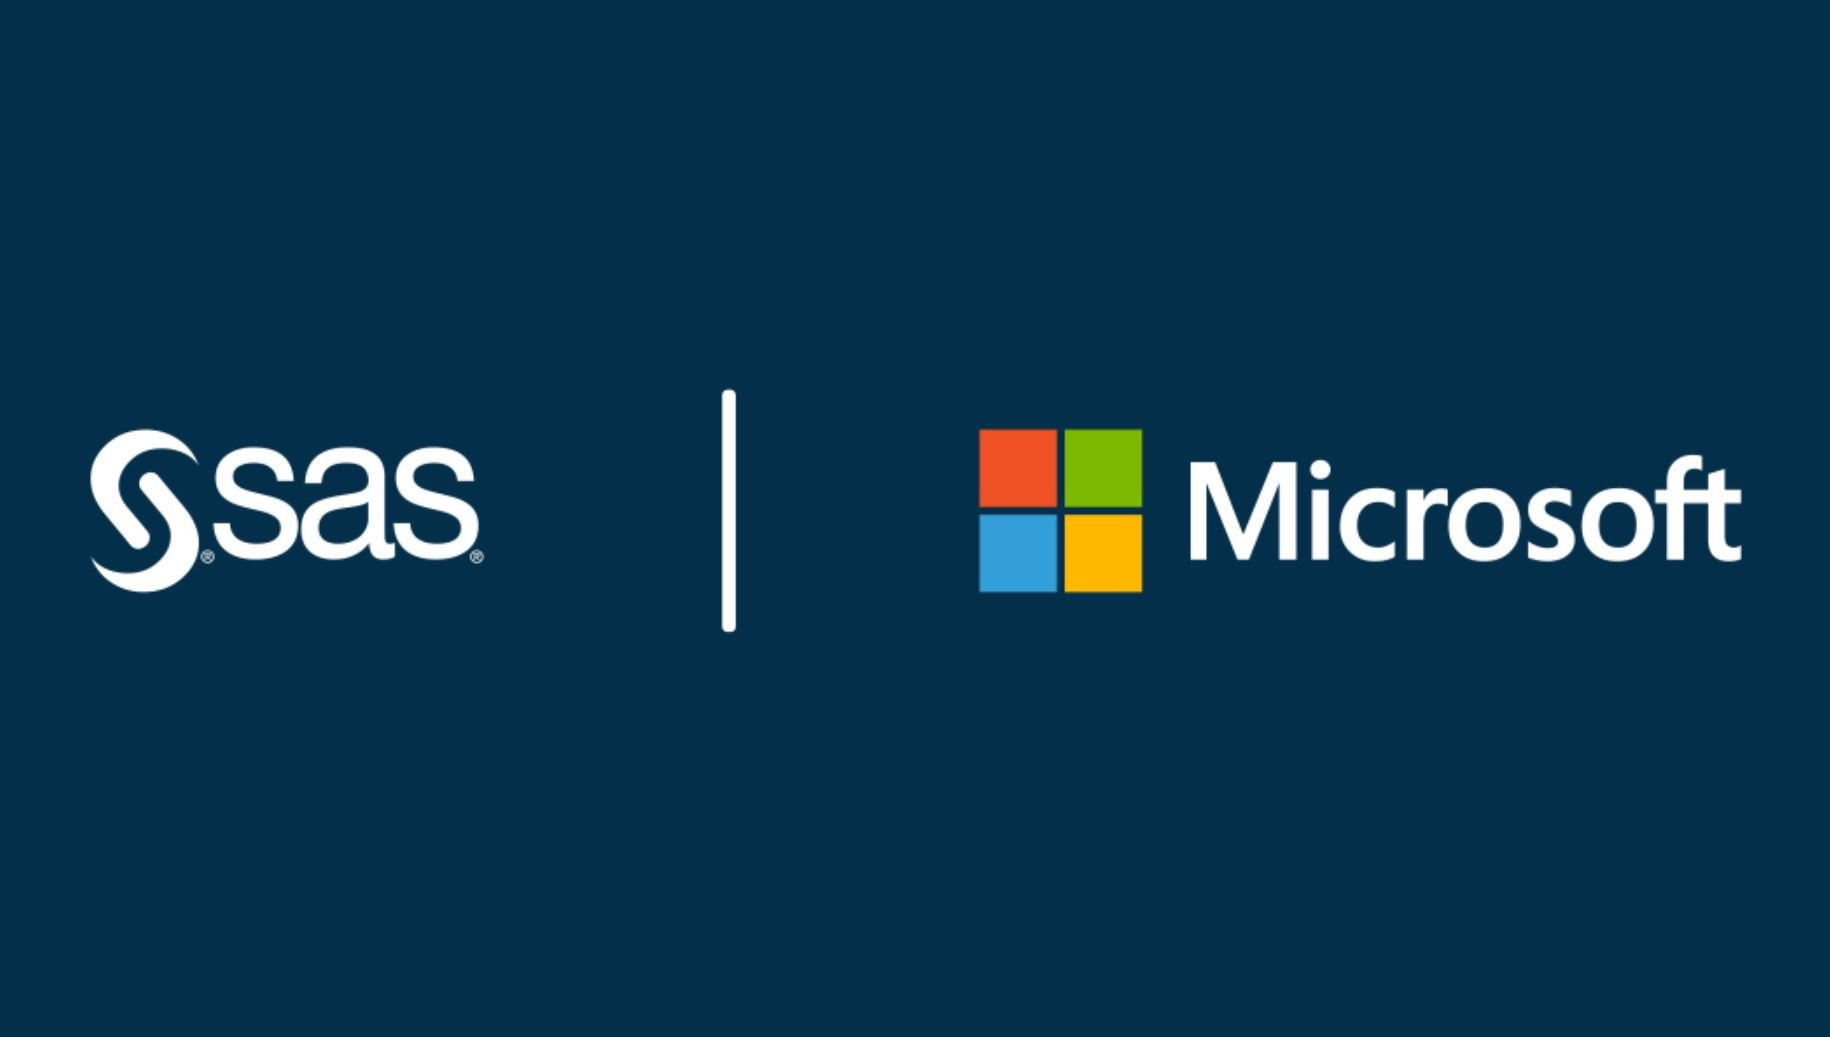 Microsoft and SAS announce extensive technology and go-to-market partnership